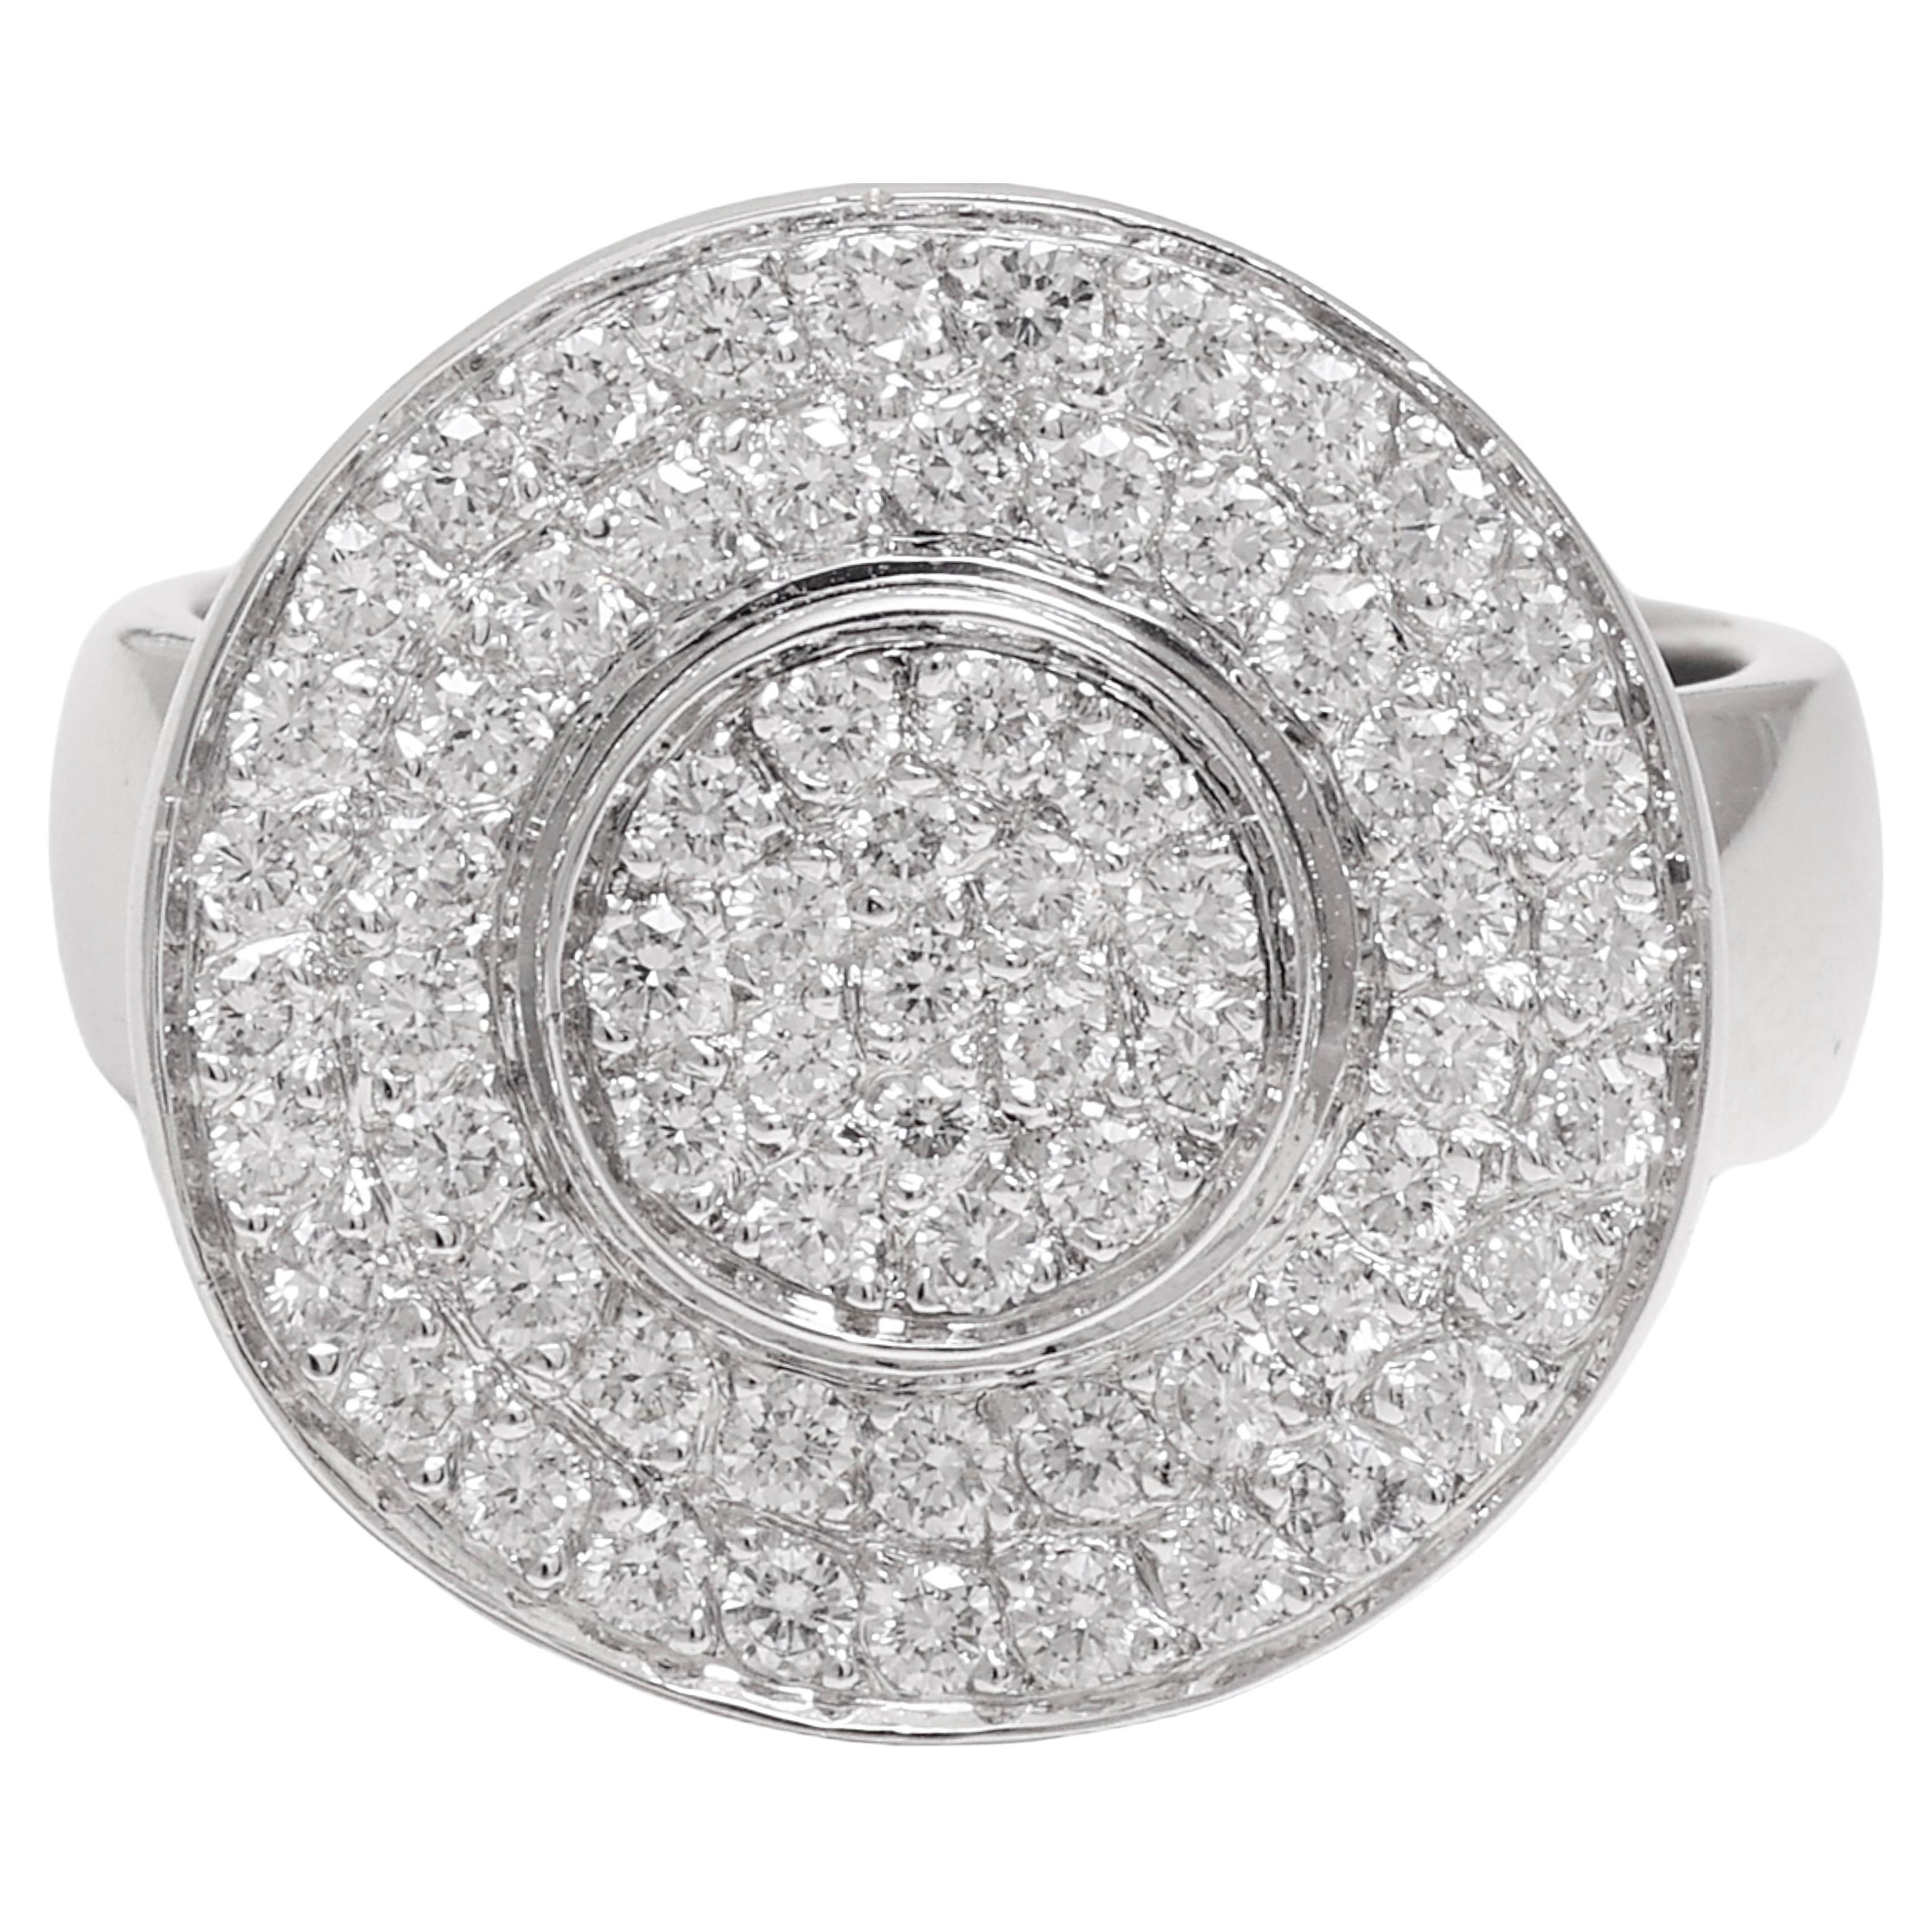 Beautiful 18 kt. White Gold Ring With 1.44 ct. Diamonds

Diamonds: Brilliant cut diamonds, together 1.44 ct.

Material: 18 kt. solid white gold

Ring size:  53.1 EU / 6.5 US, can be resized for free

Total weight: 8.6 grams / 0.305 oz / 5.5 dwt